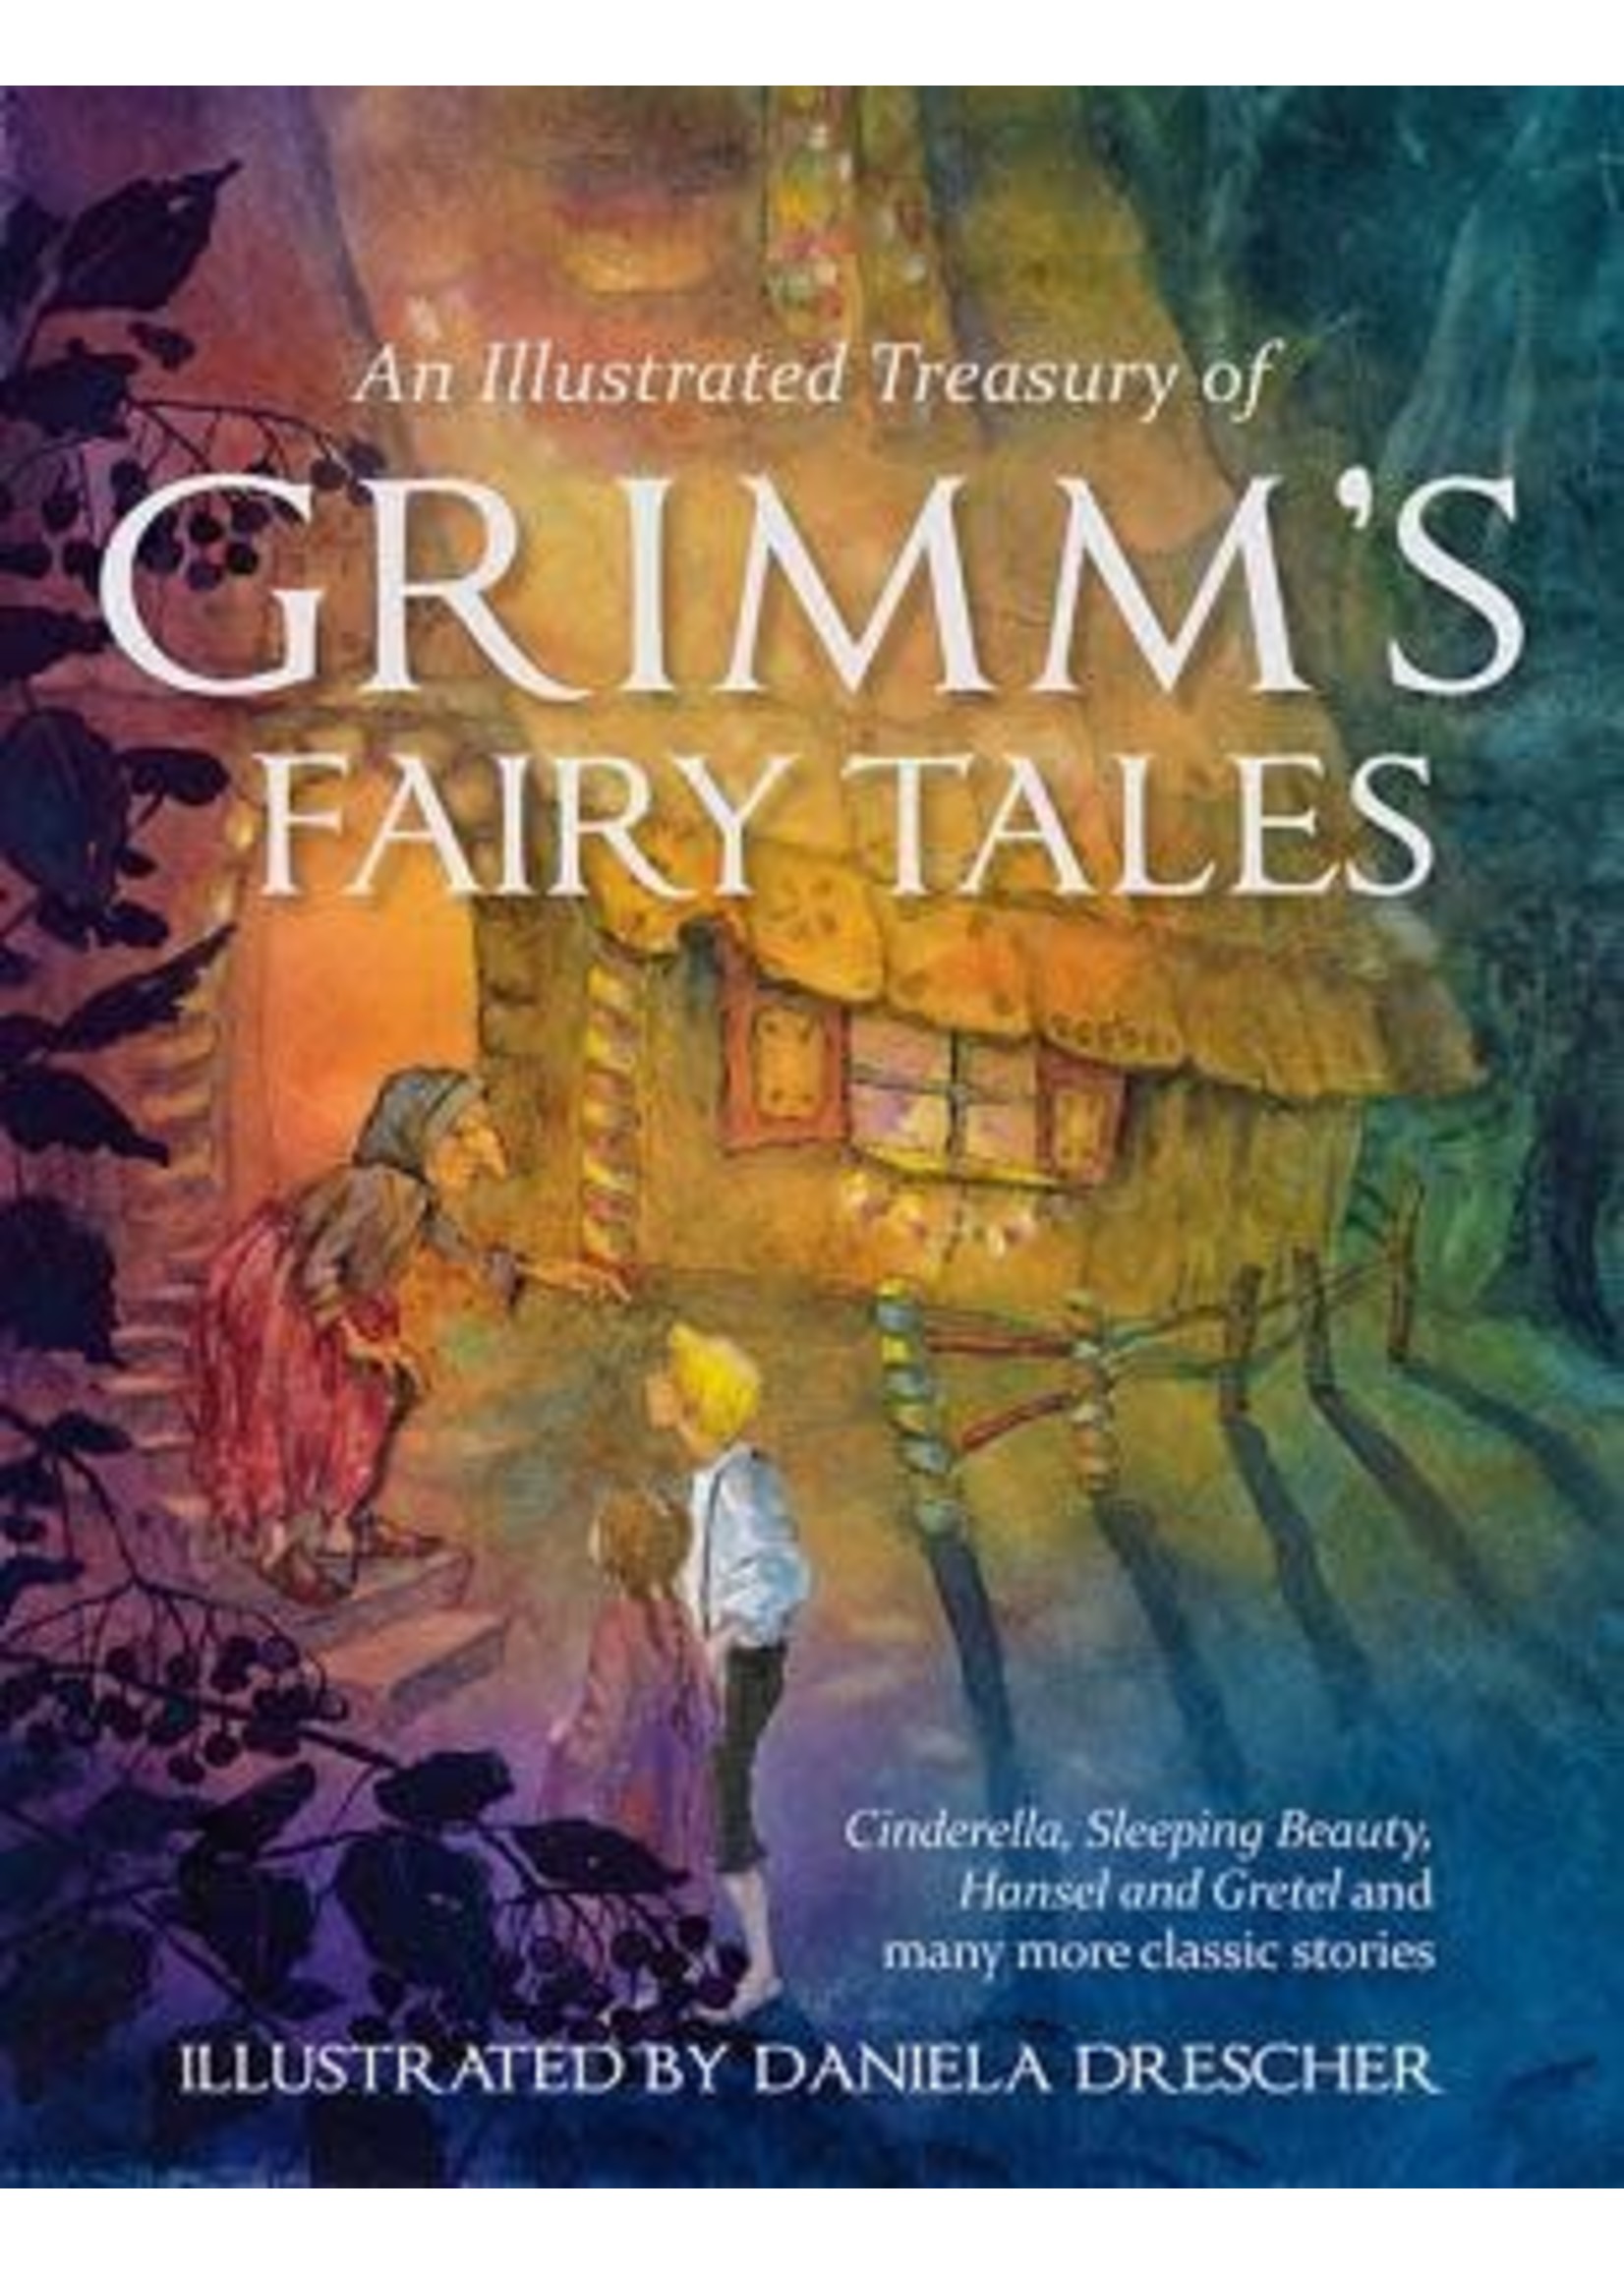 An Illustrated Treasury of Grimm's Fairy Tales by Jacob Grimm, Wilhelm Grimm